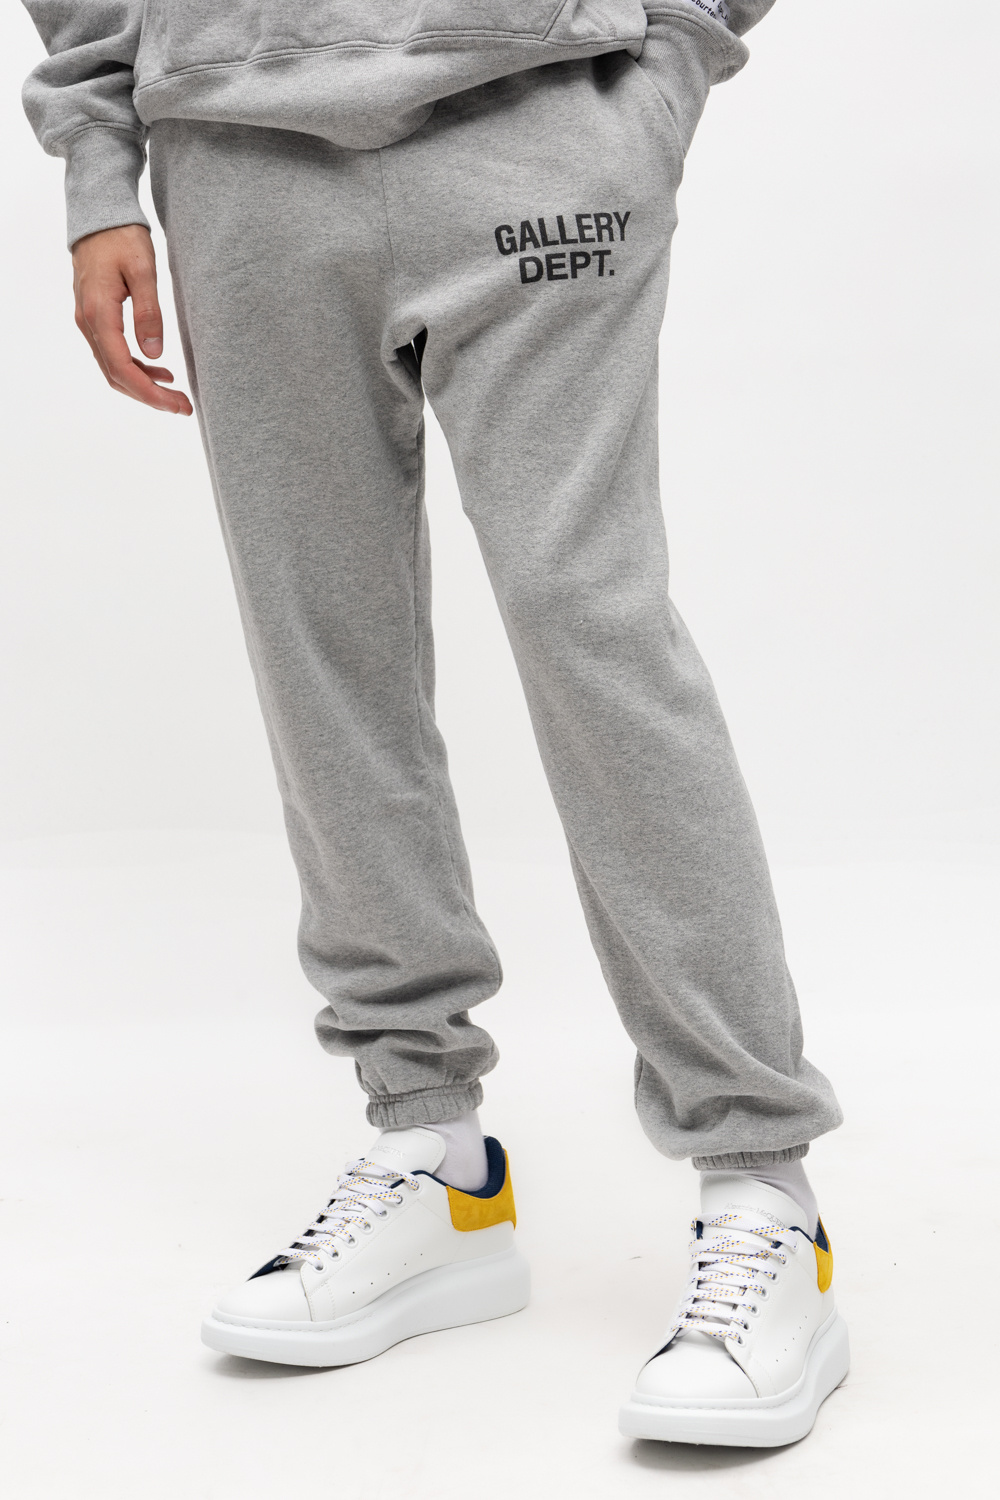 Gallery Dept Sweatpants Small in 2023